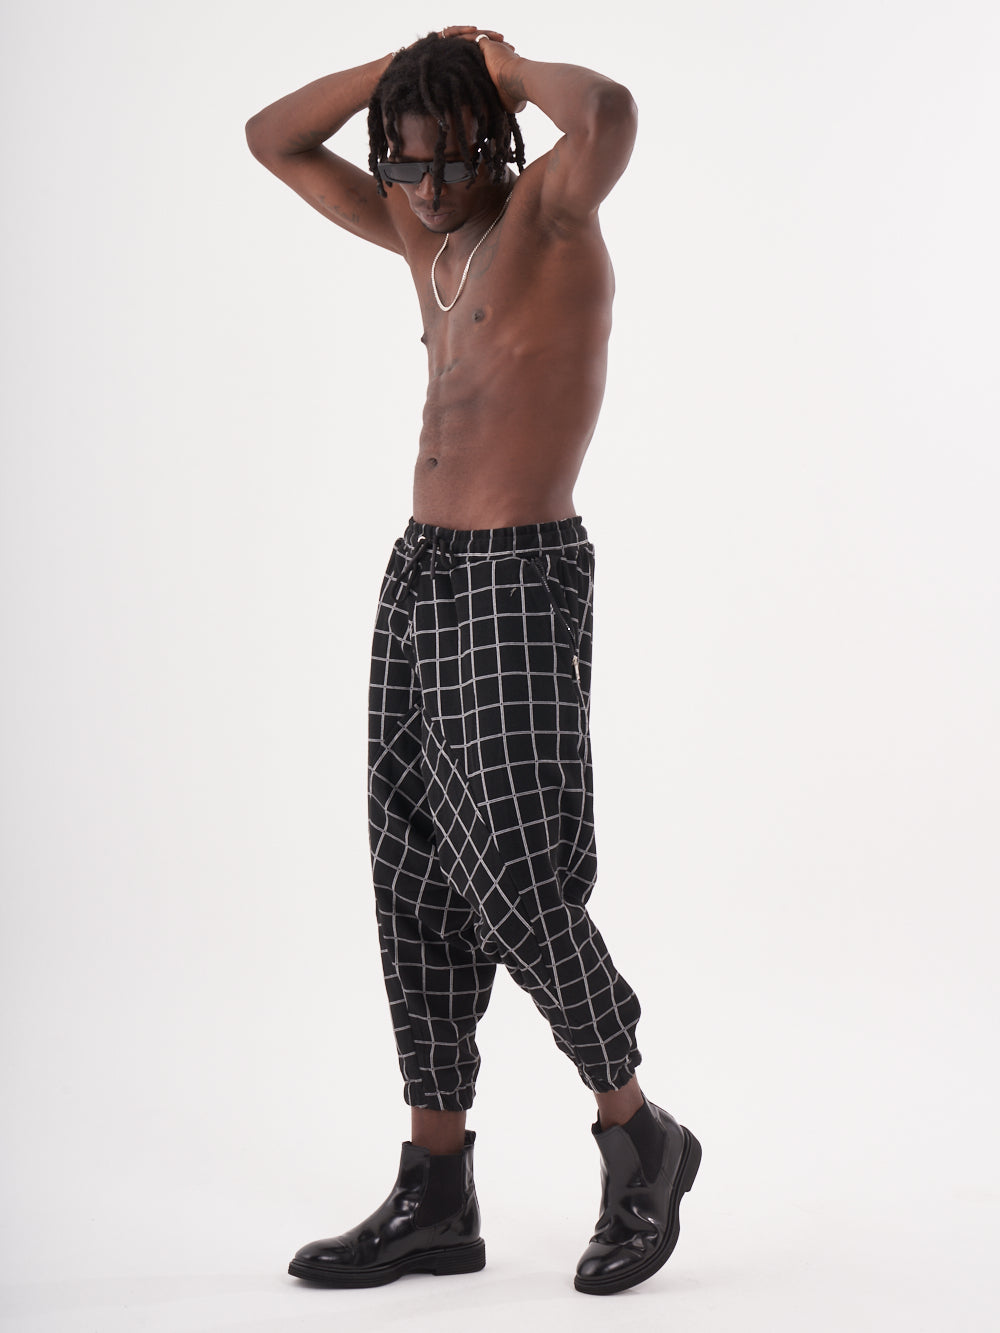 A man wearing WACKADOO JOGGERS, also known as Harem Pants.